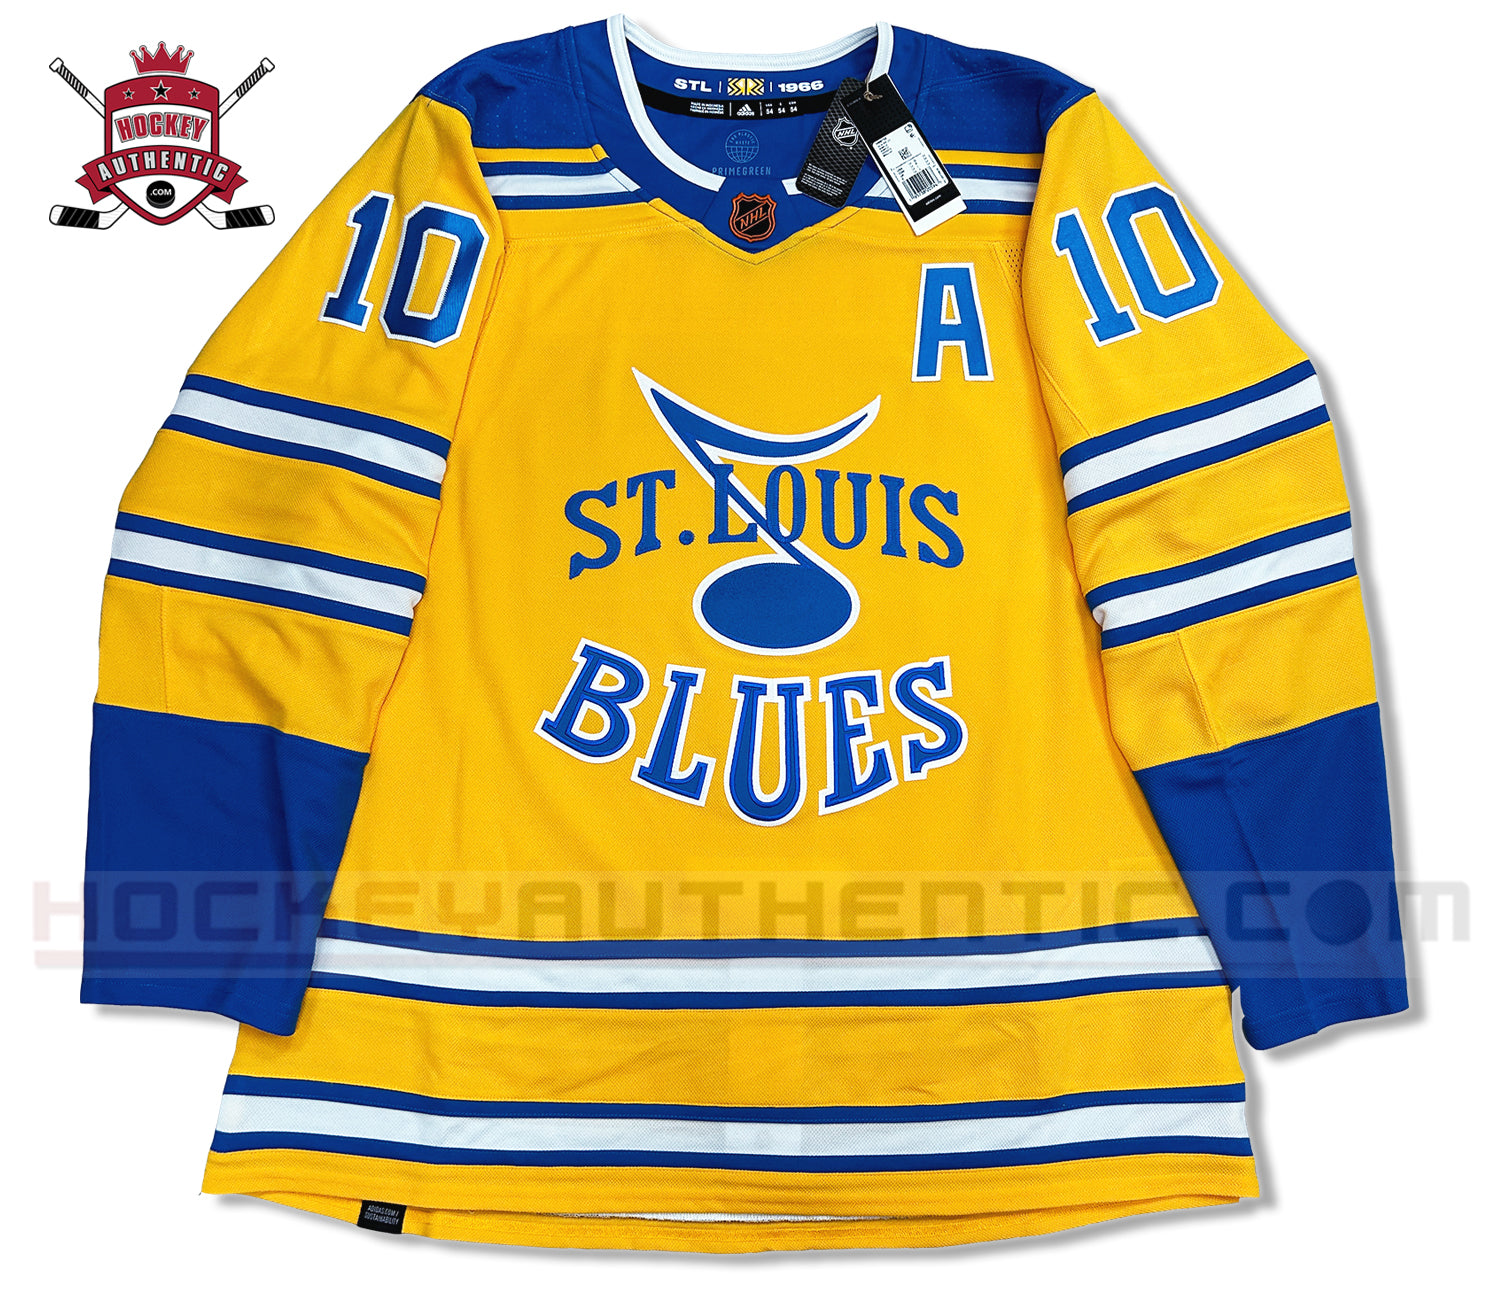 St. Louis Blues on X: It's all in the details. #ReverseRetro